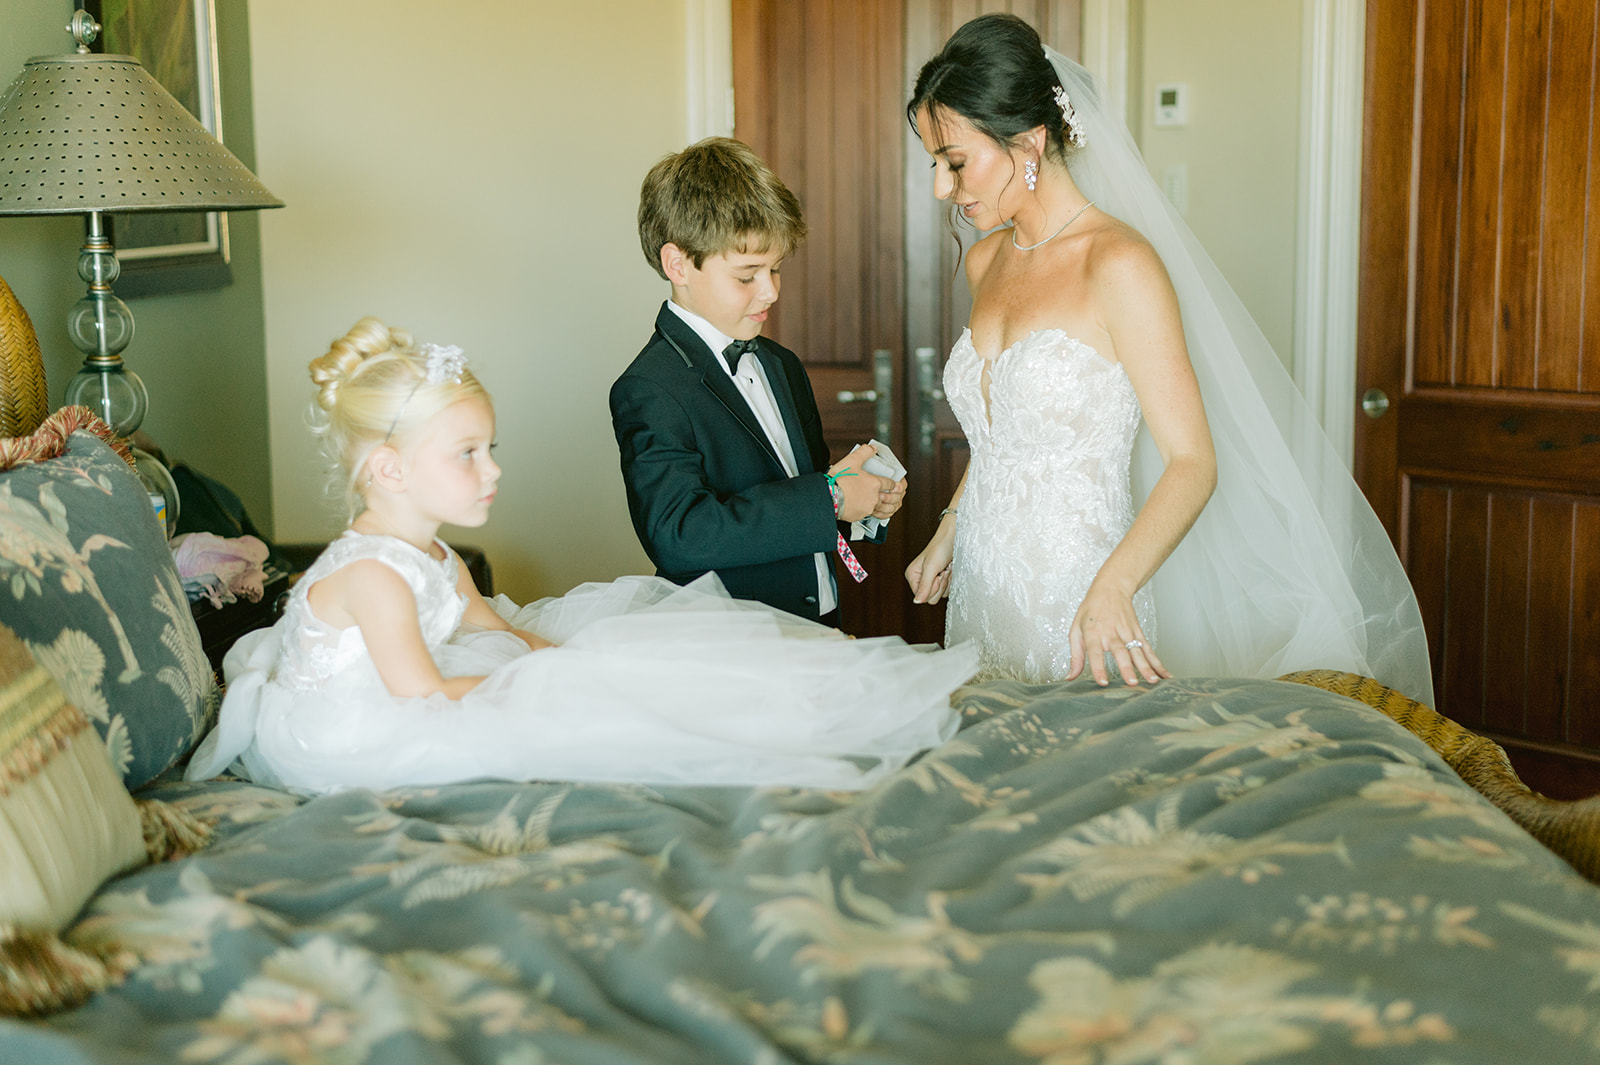 Marco Island Wedding Photographer Captures Your Special Day
